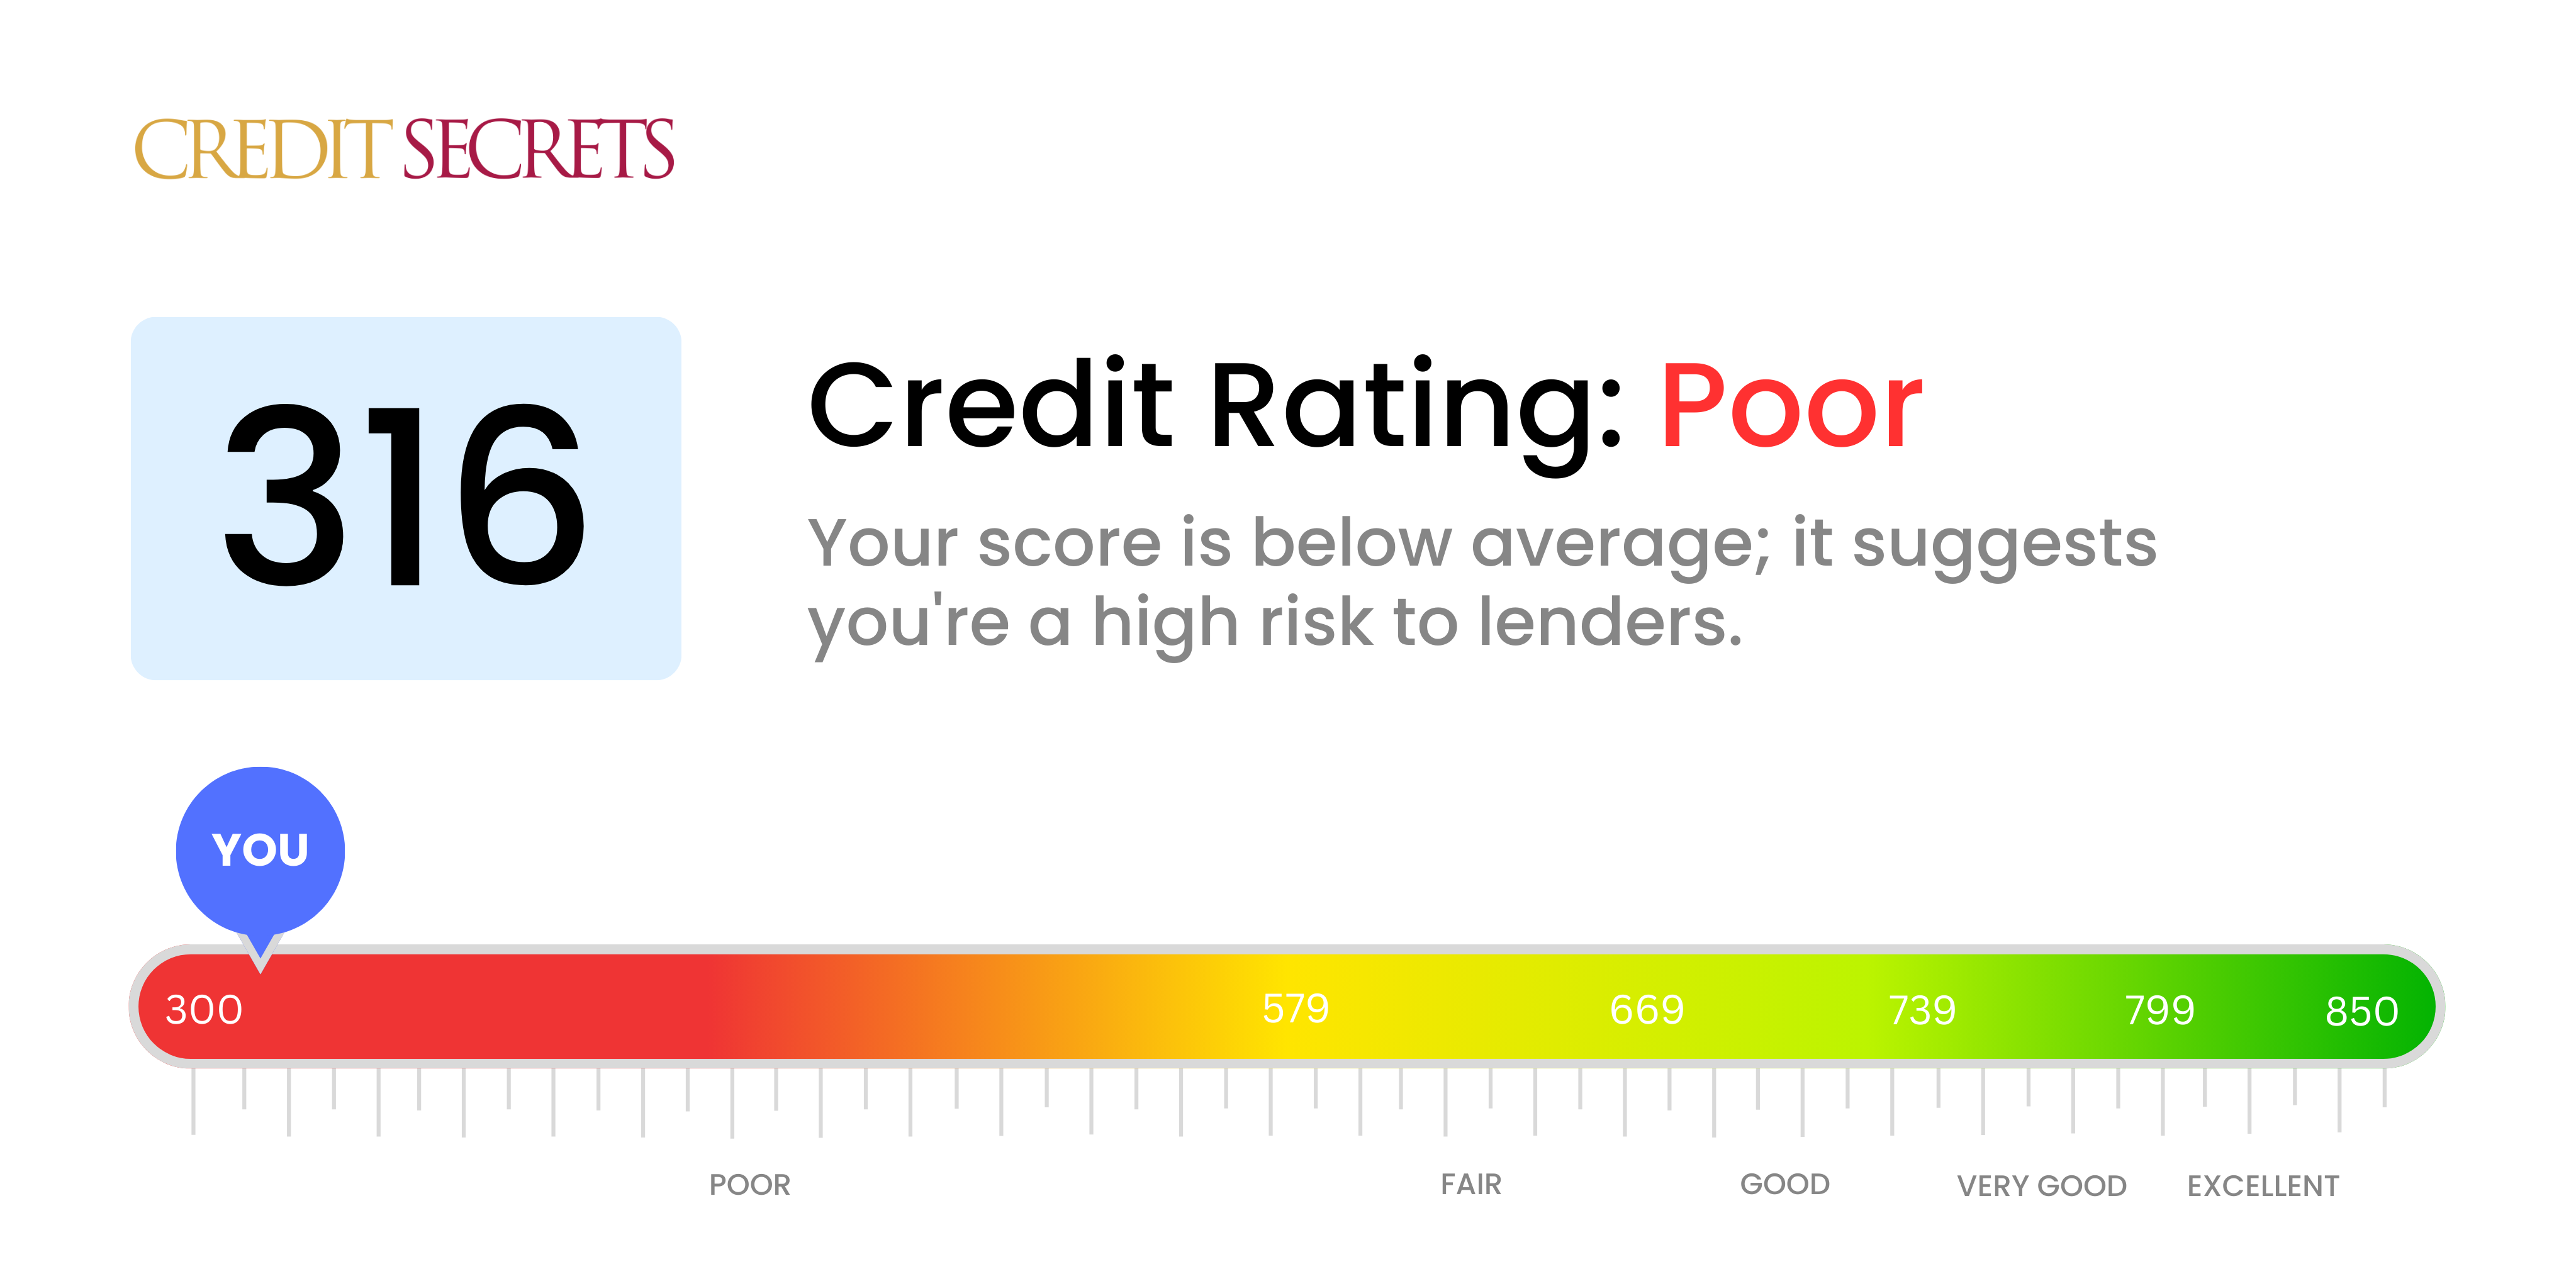 Is 316 a good credit score?